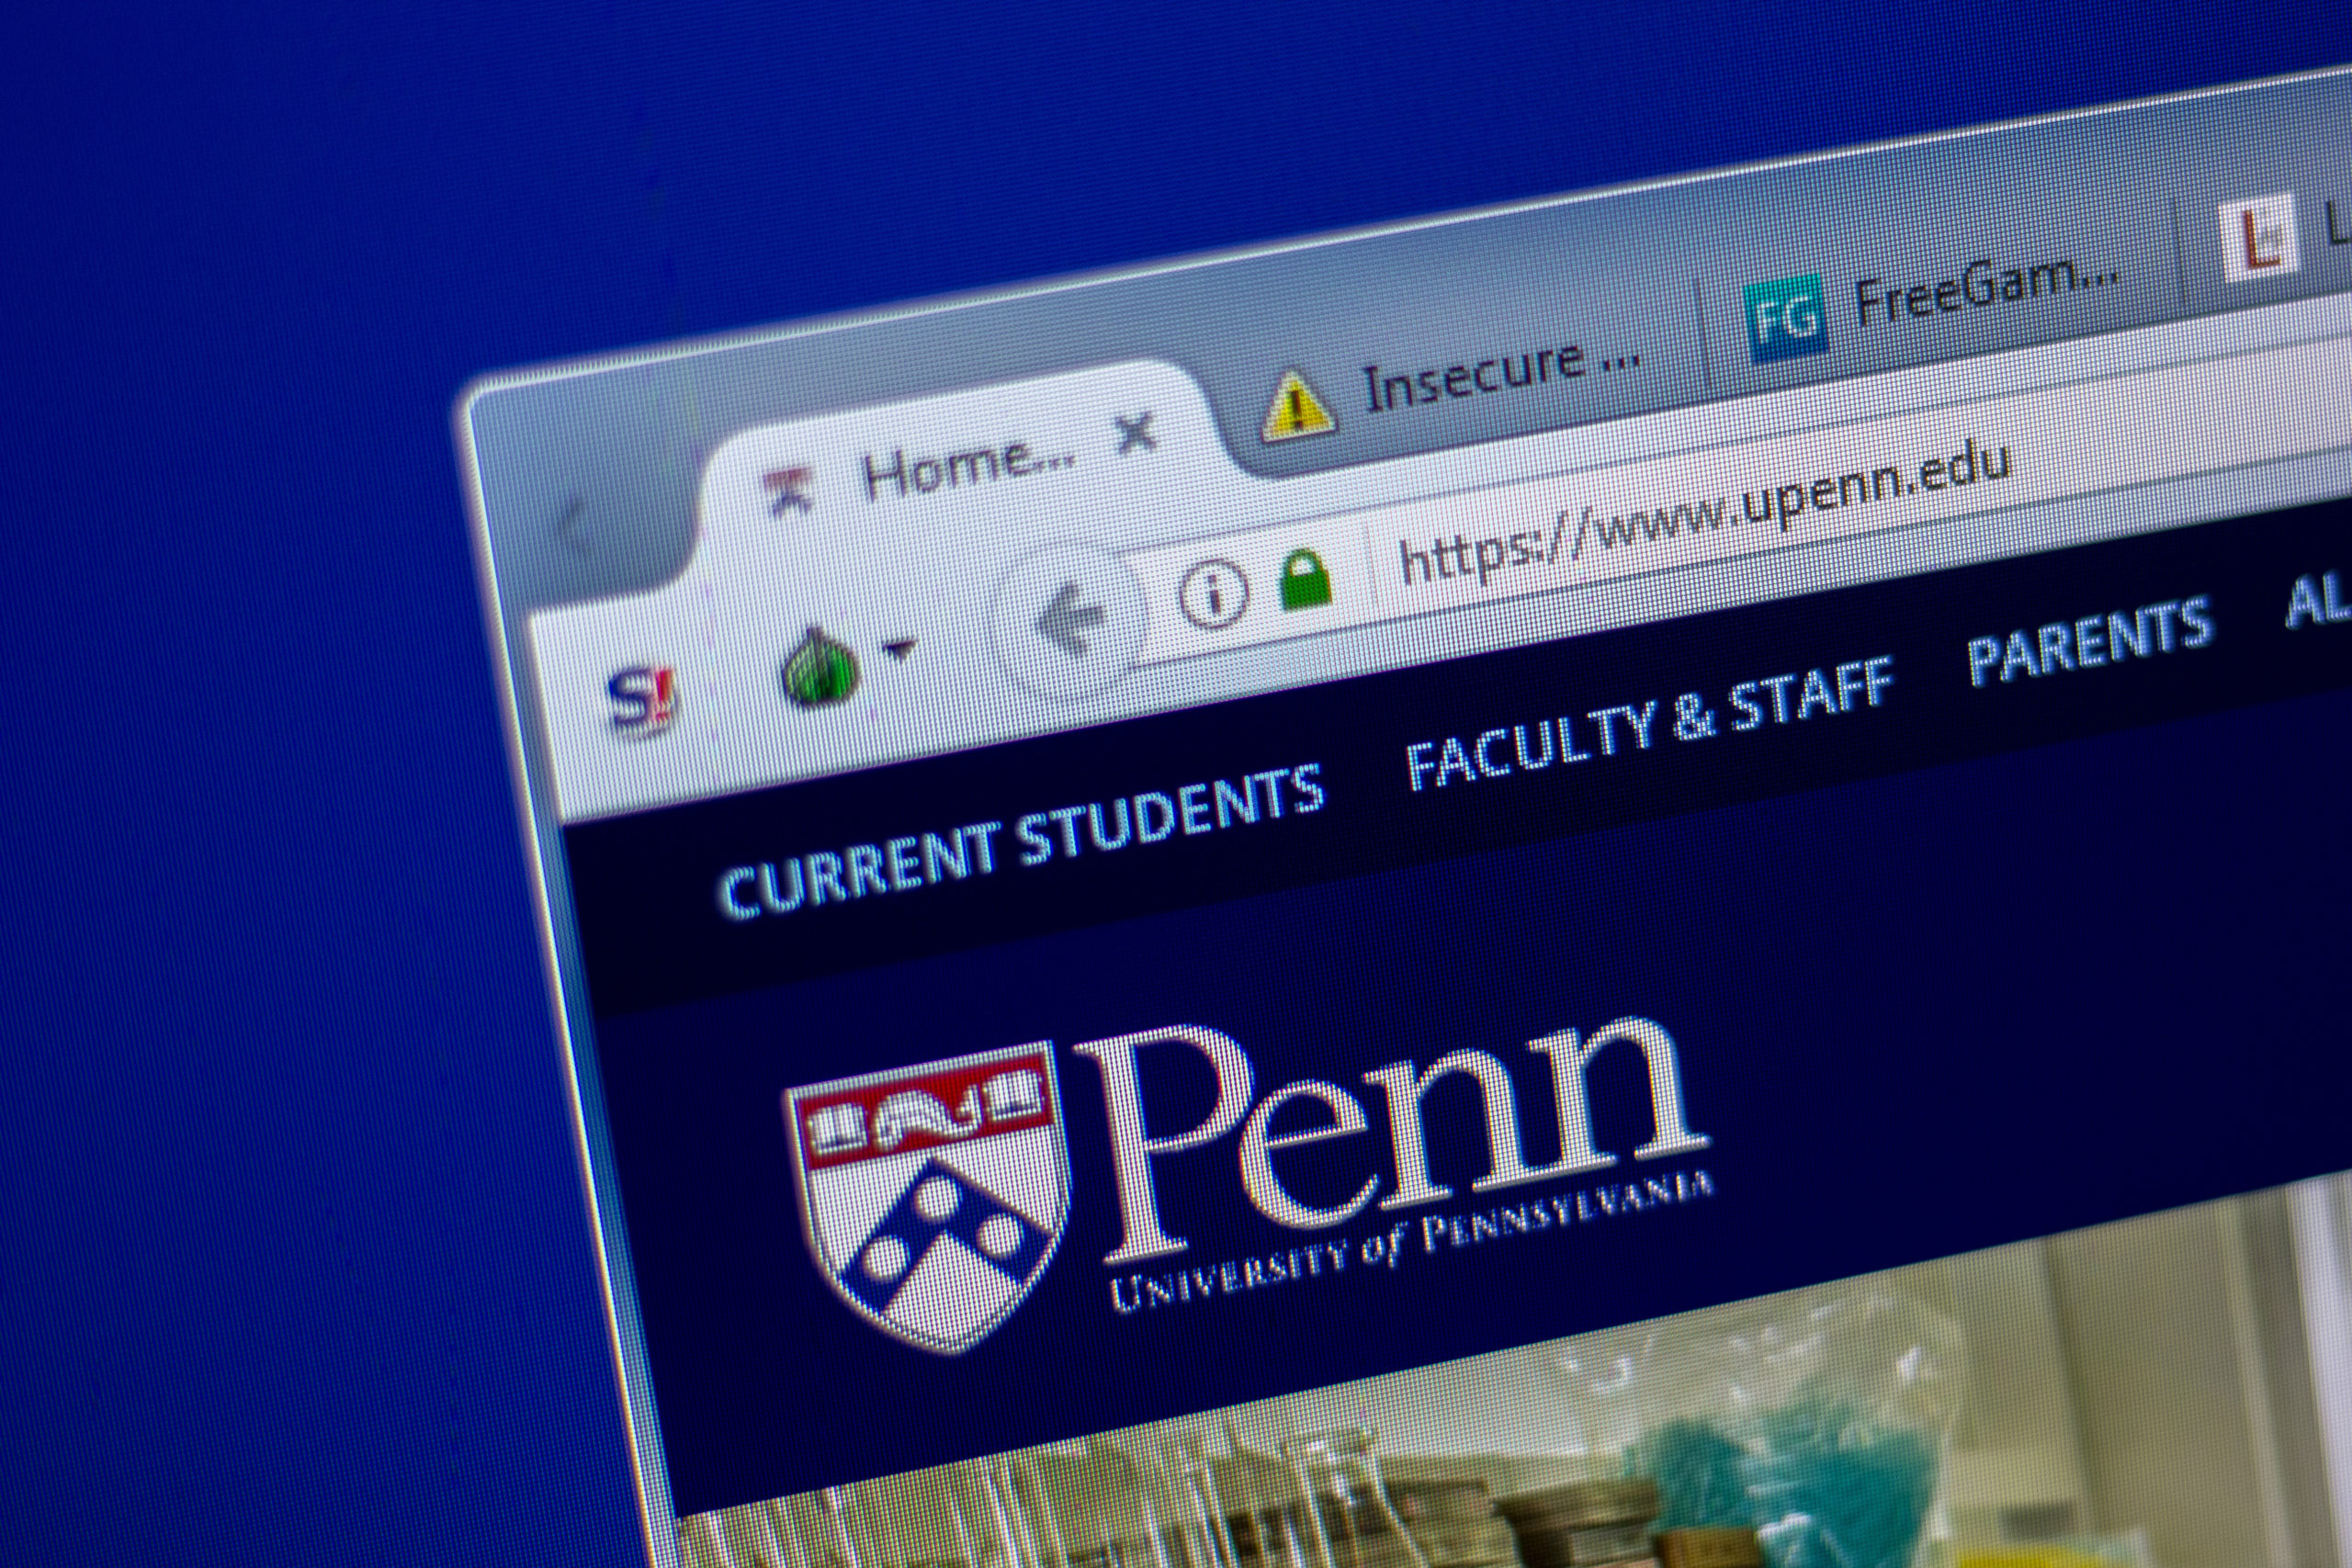 New Evidence in Civil Rights Complaint Against UPenn